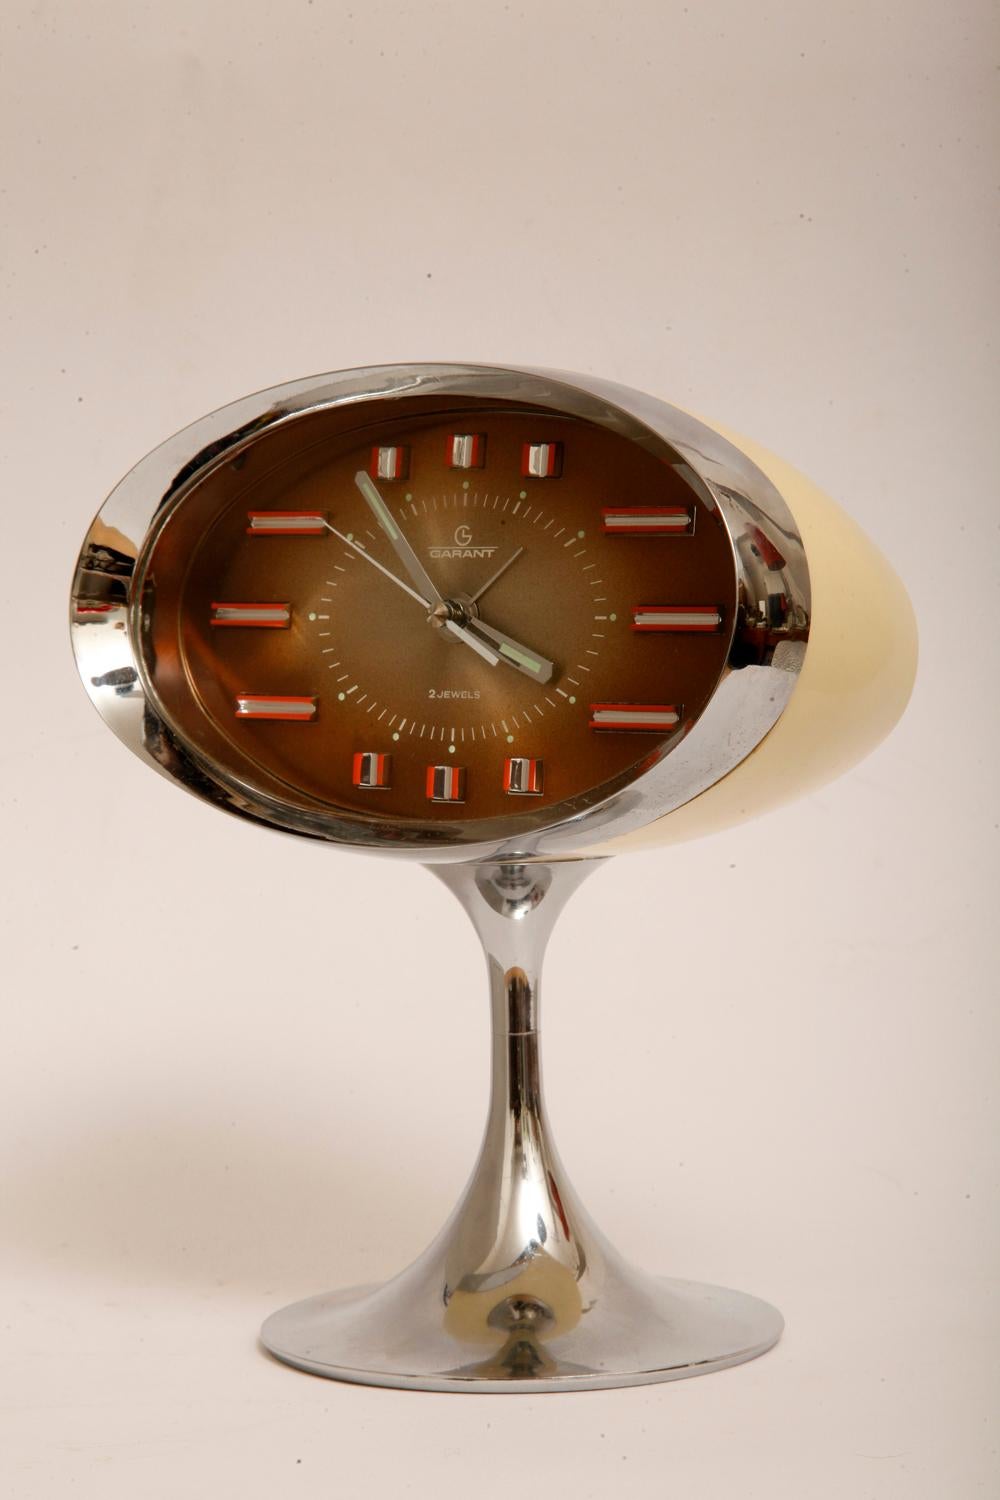 Japanese Space Age Alarm Clock Garant, Plastic and Chromed, 1970s For Sale 11